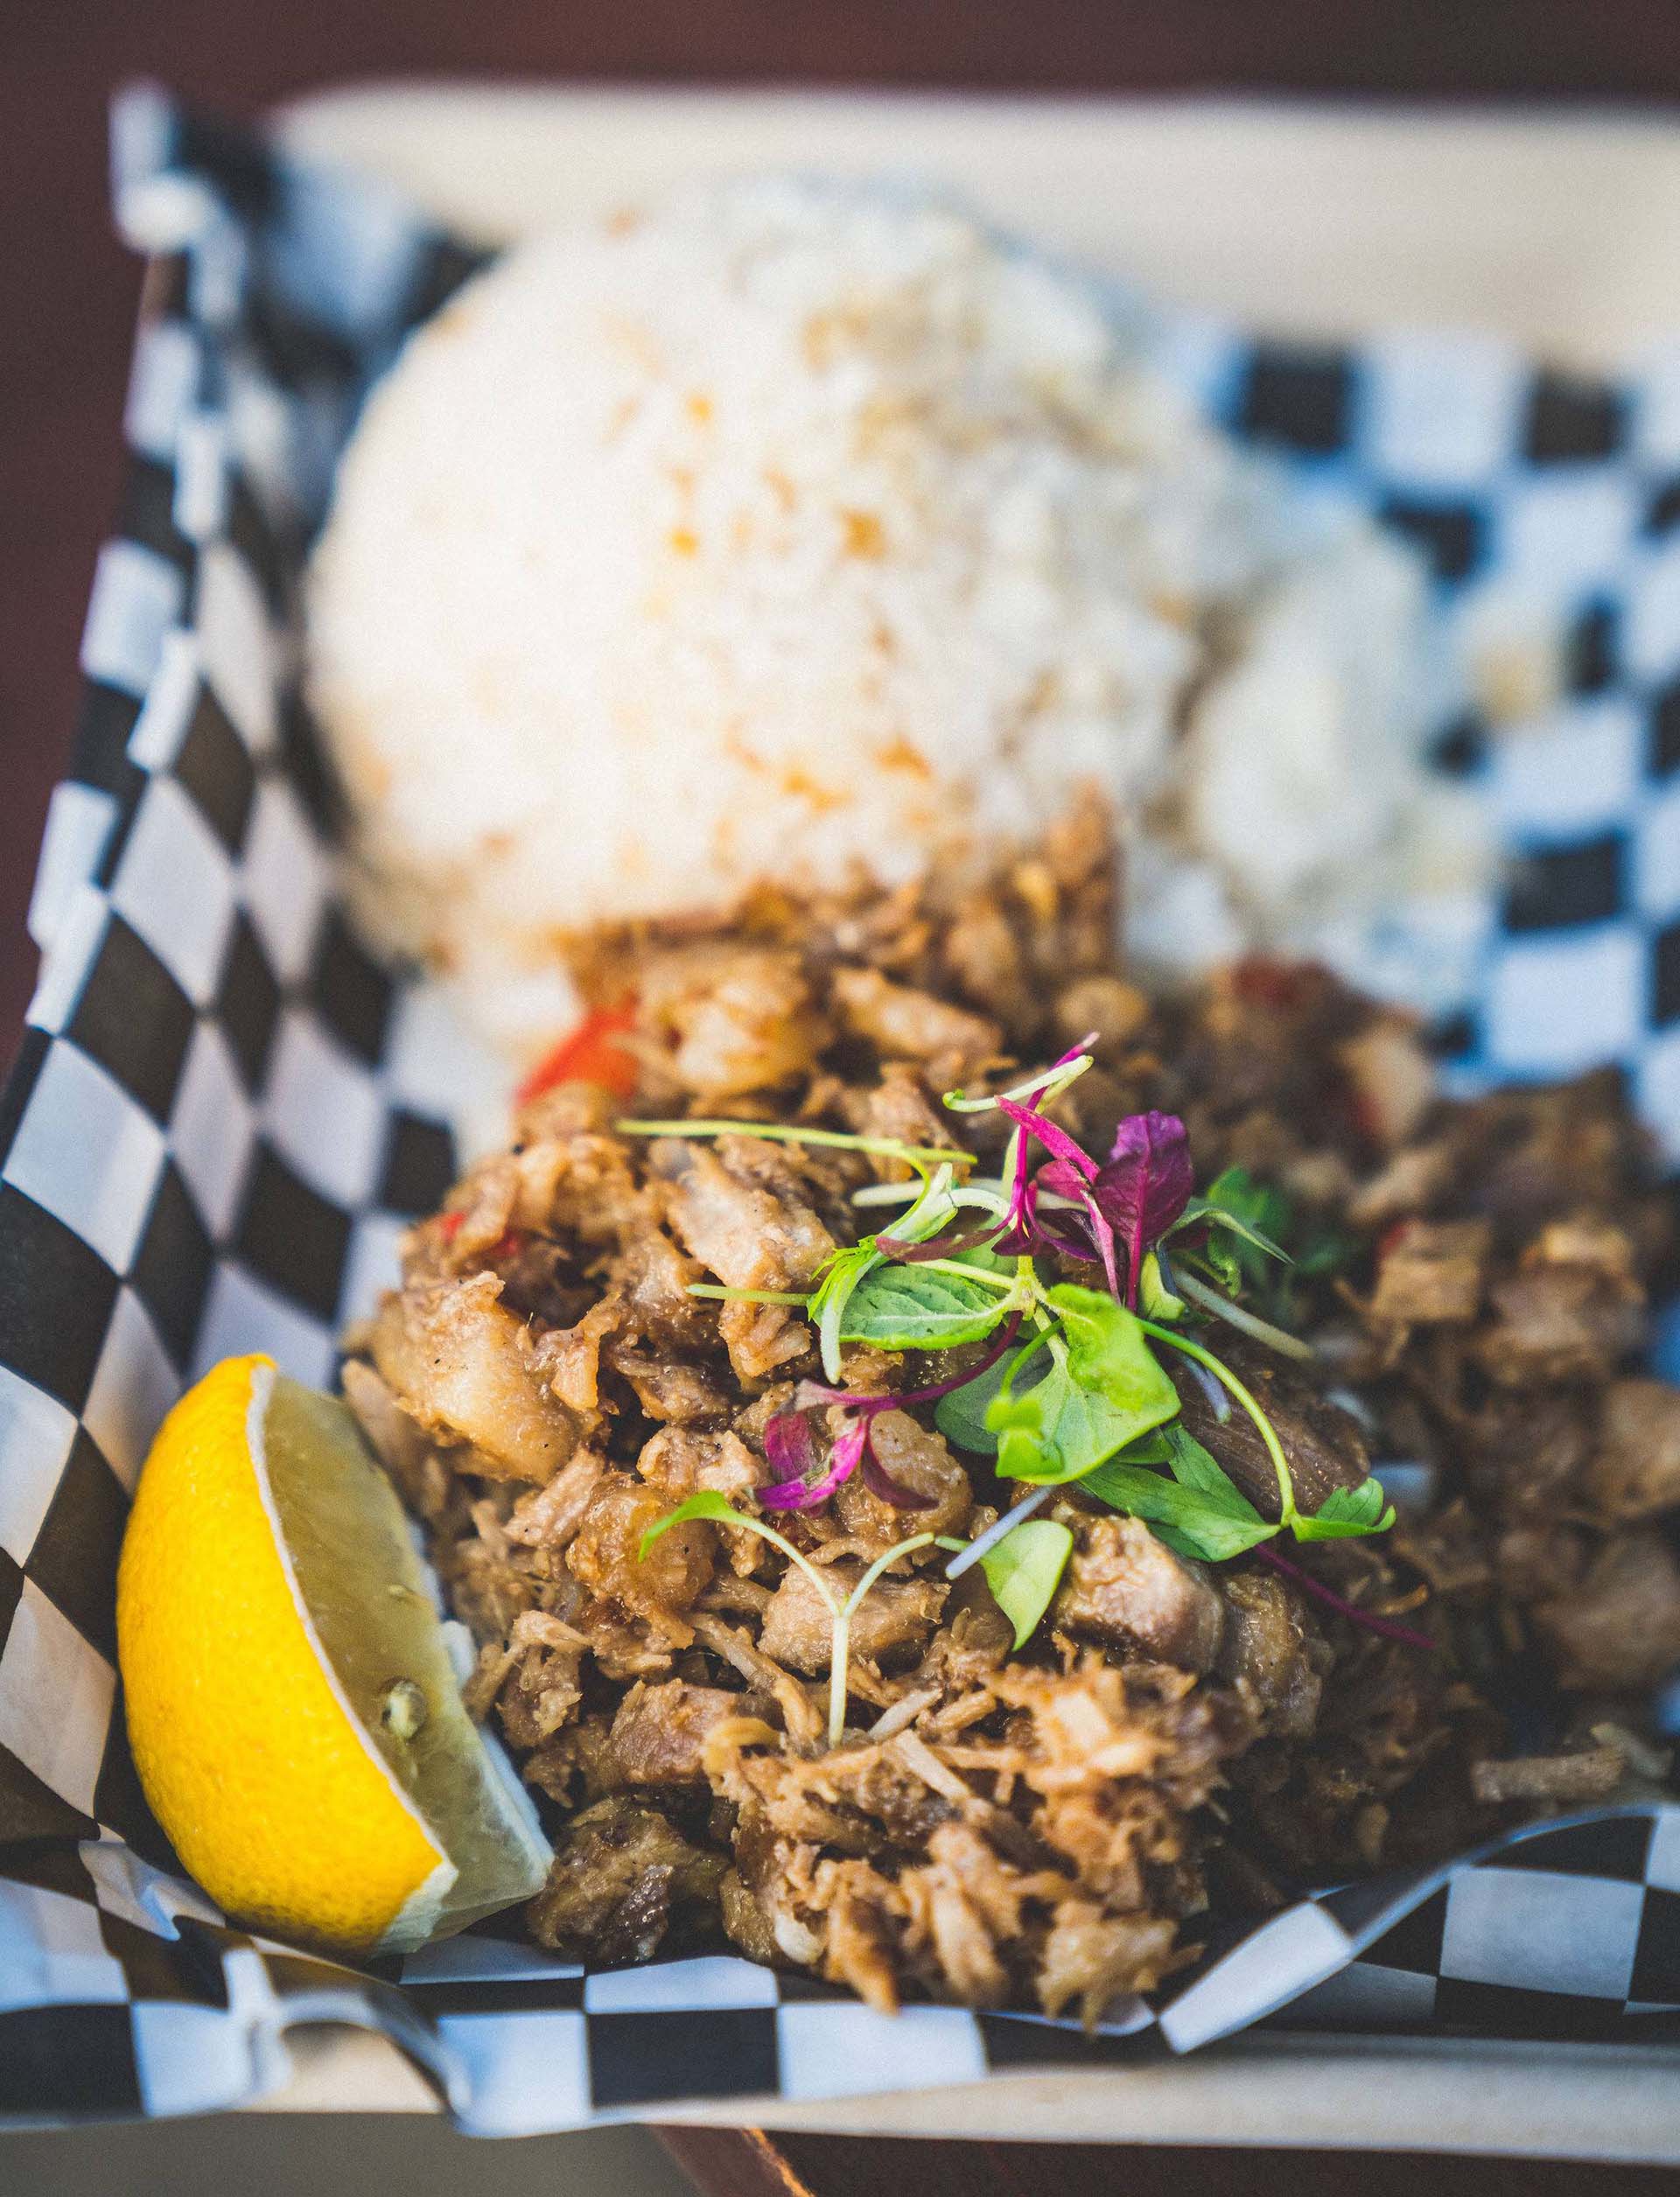 Pork sisig served with a slice of lemon and a mound of white rice.